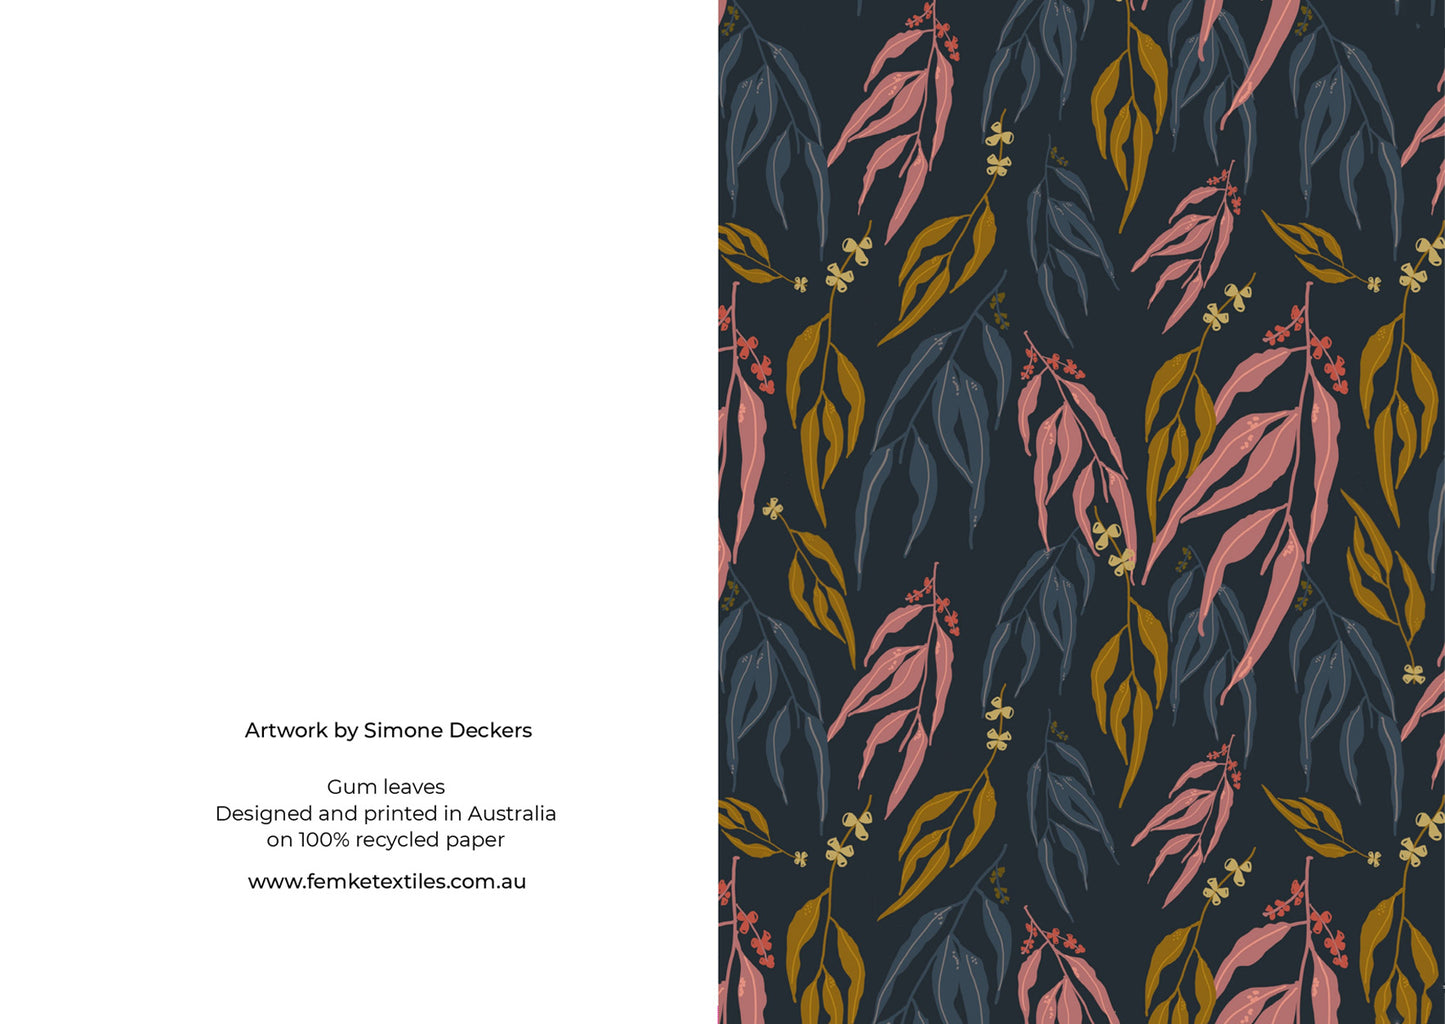 A greeting card featuring gum leaves in mustard, pink and grey. Designed by Femke Textiles.